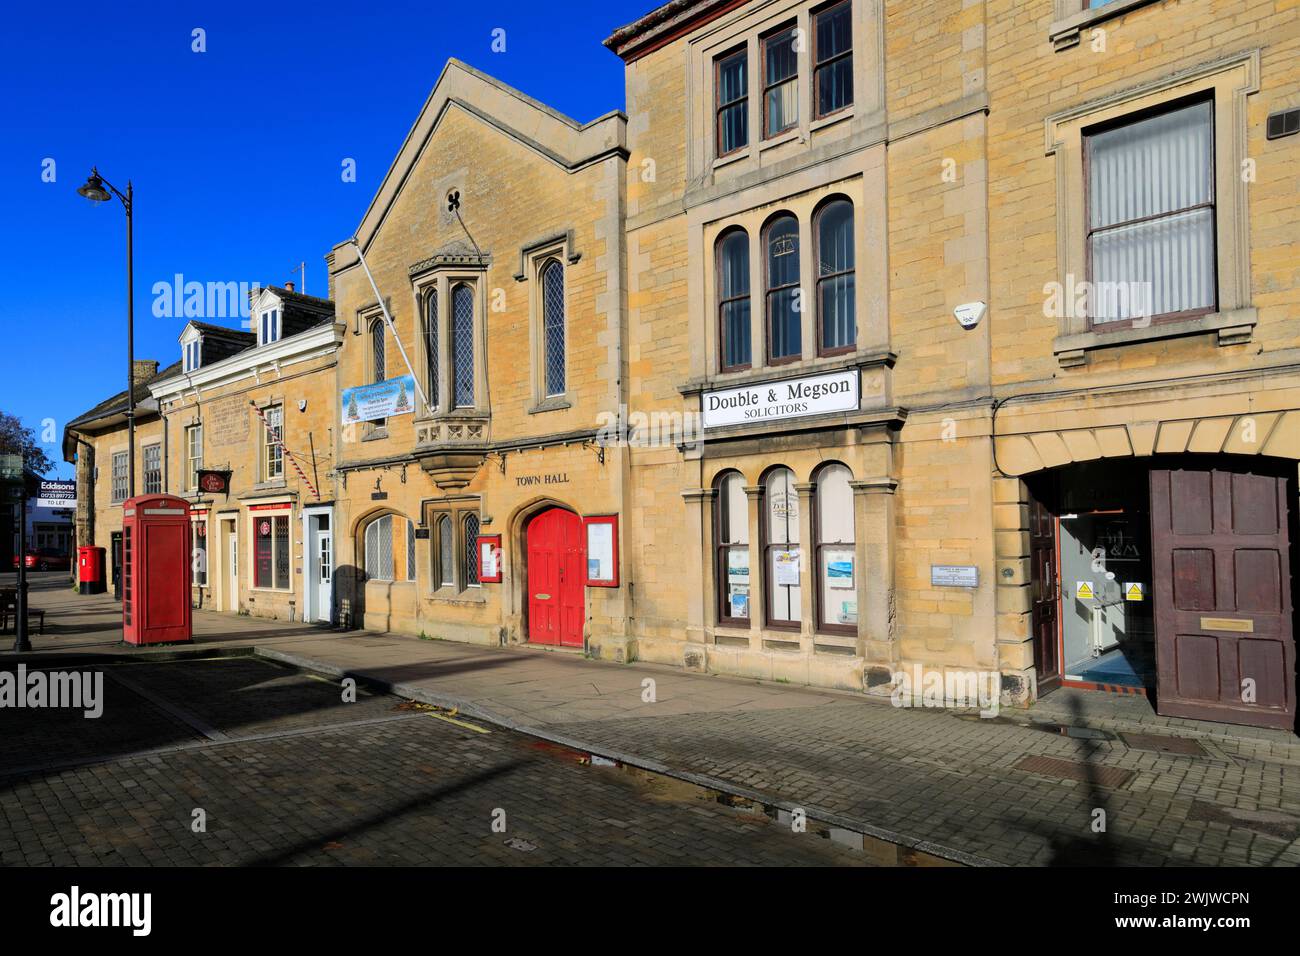 Architecture around the market square, Market Deeping town, Lincolnshire County, England, UK Stock Photo